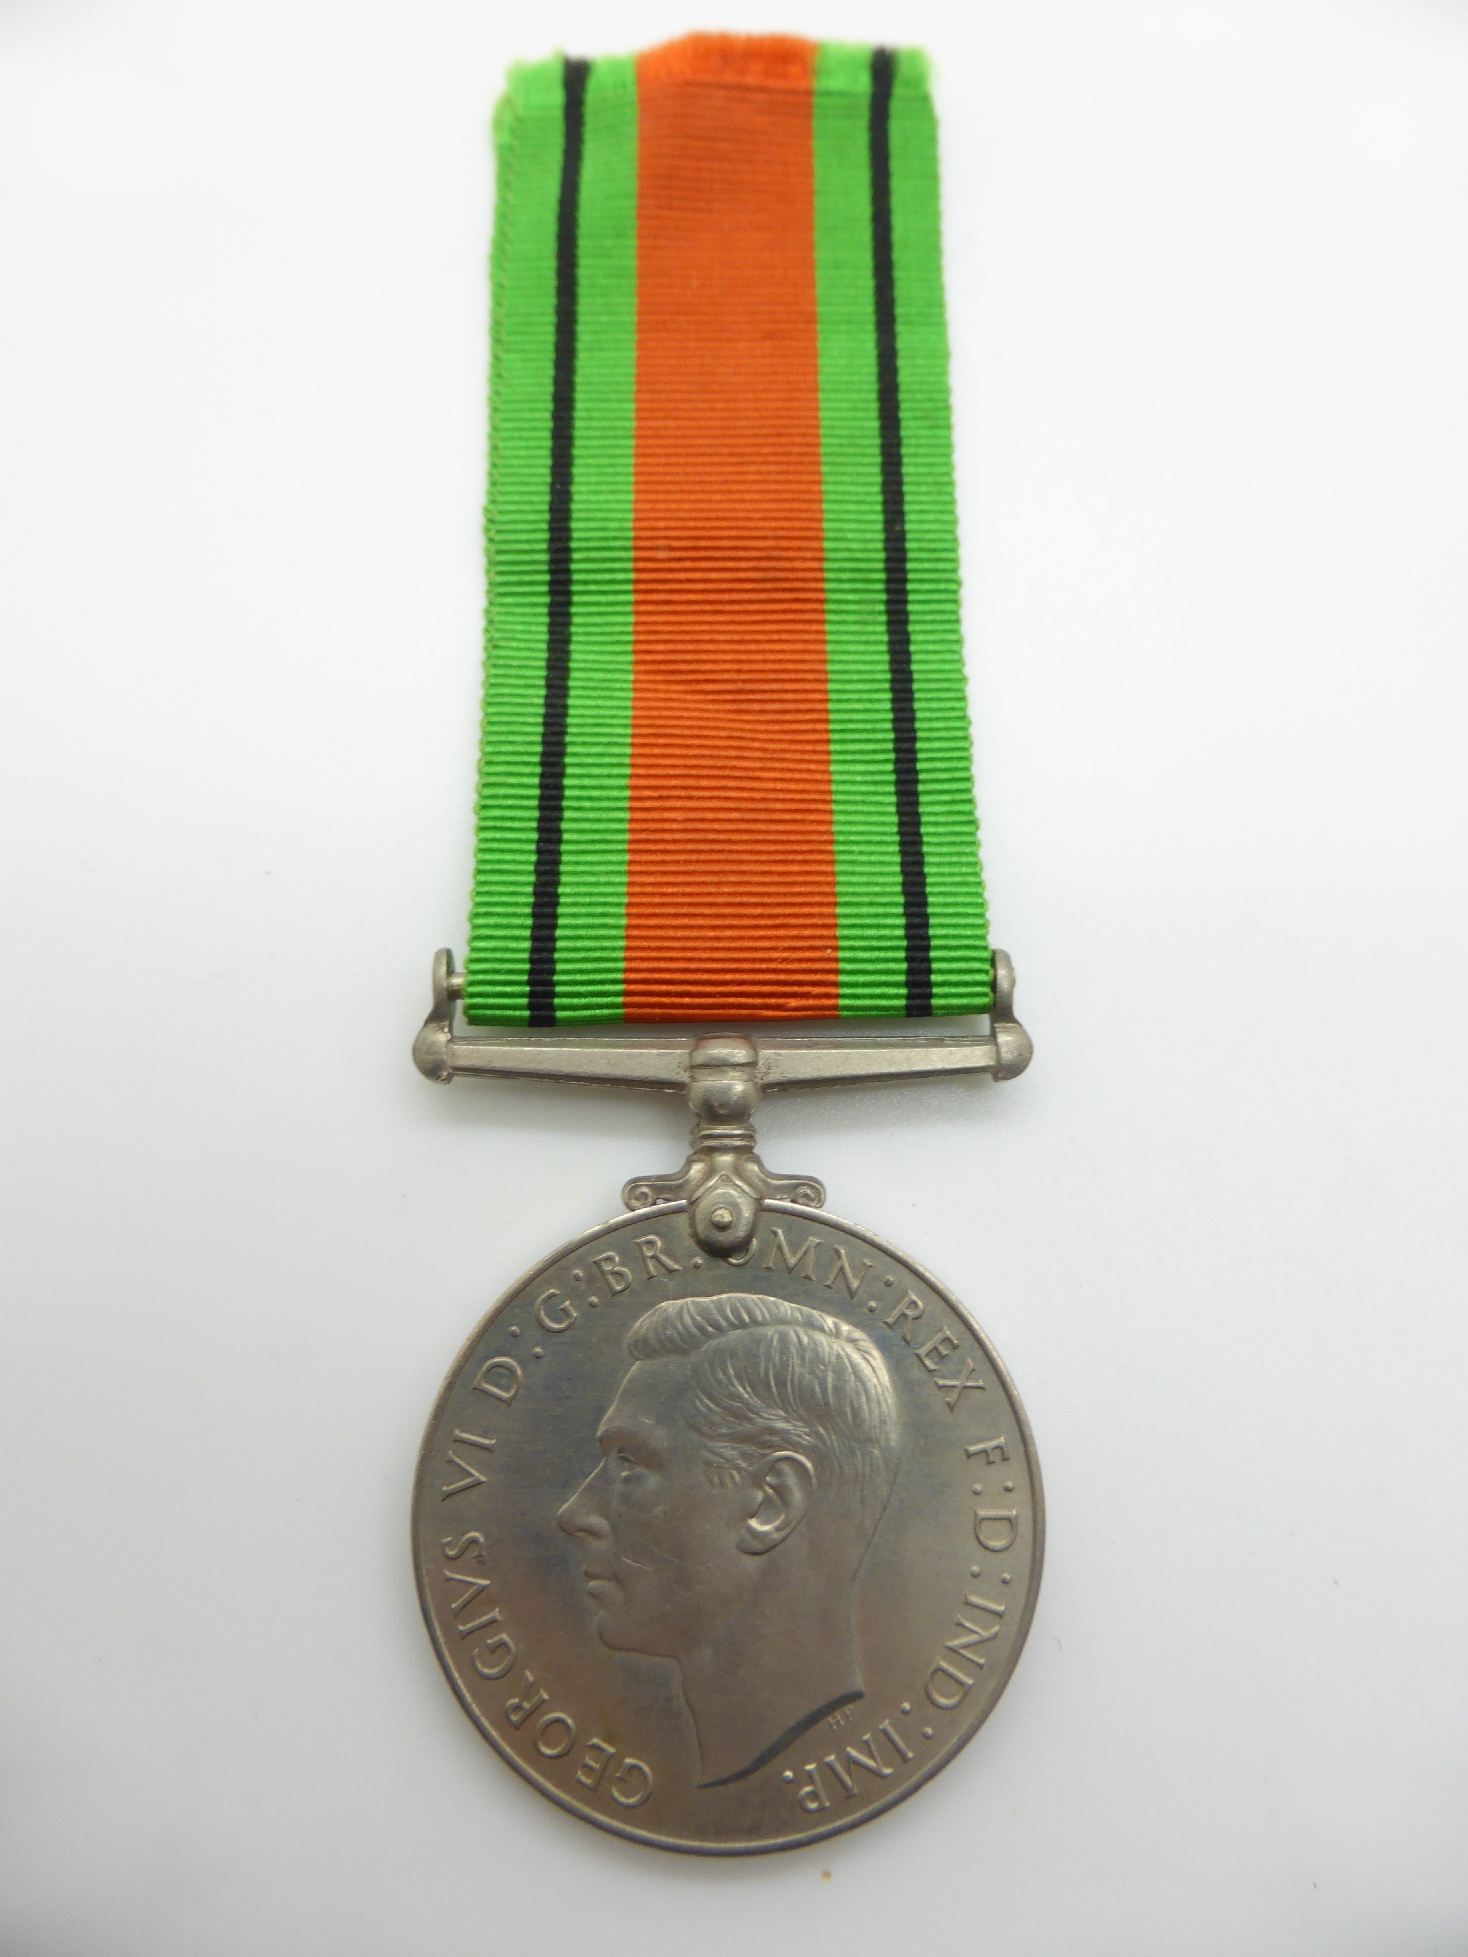 British Army WWII medals comprising 1939/45 Star, France and Germany Star, War Medal and Defence - Image 6 of 20